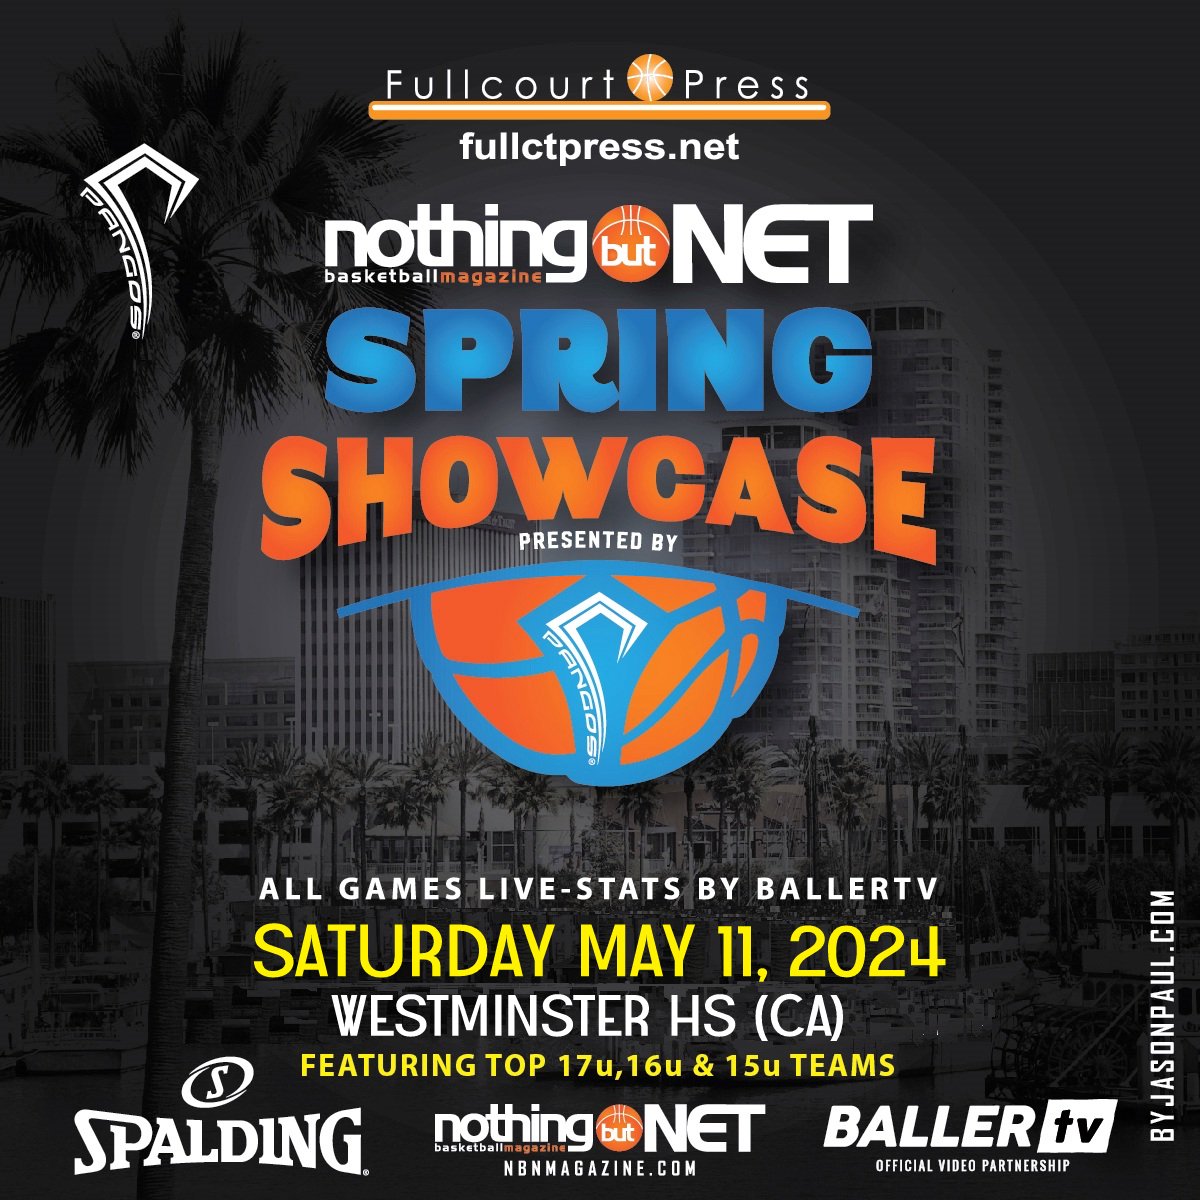 Next Up on the @FCPPangos event docket: @NBNMagazine Spring Showcase for 17u, 16u & 15u AAU squads - Saturday May 11 at Westminster HS/CA (3 courts). All games live-streamed by @BallerTV. Register your teams at: Fullctpress.net @FrankieBur